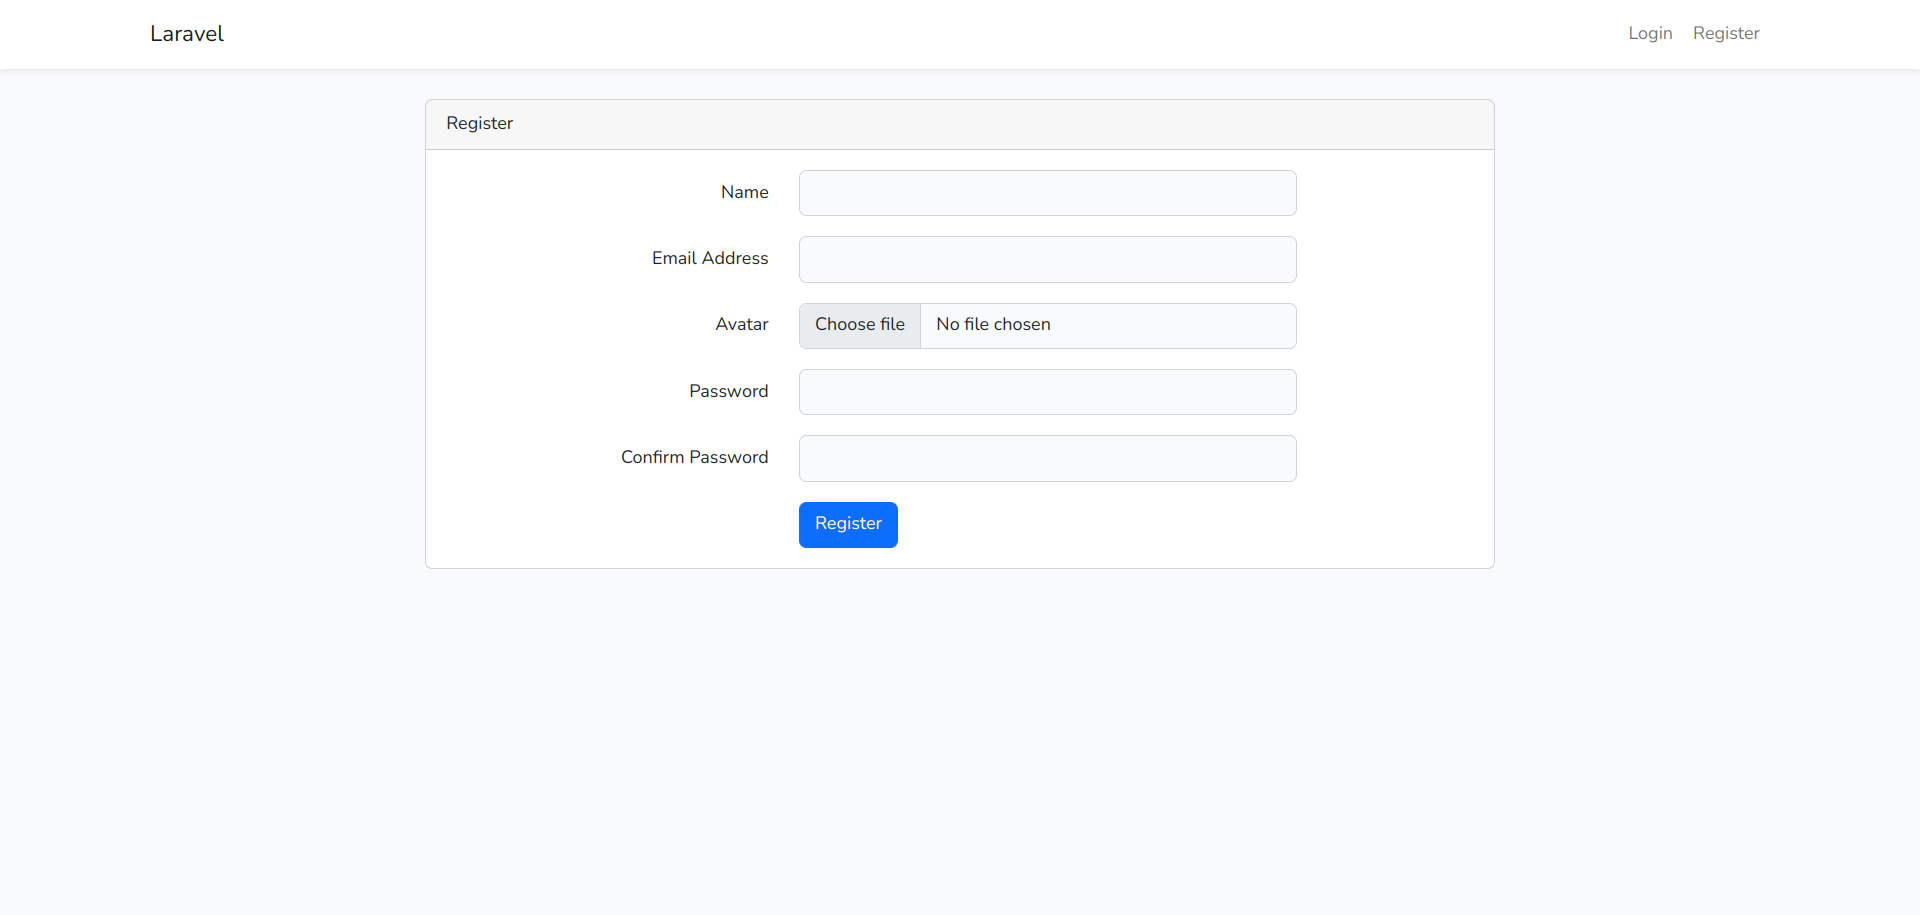 How to Upload an Image in the Registration Form in Laravel?